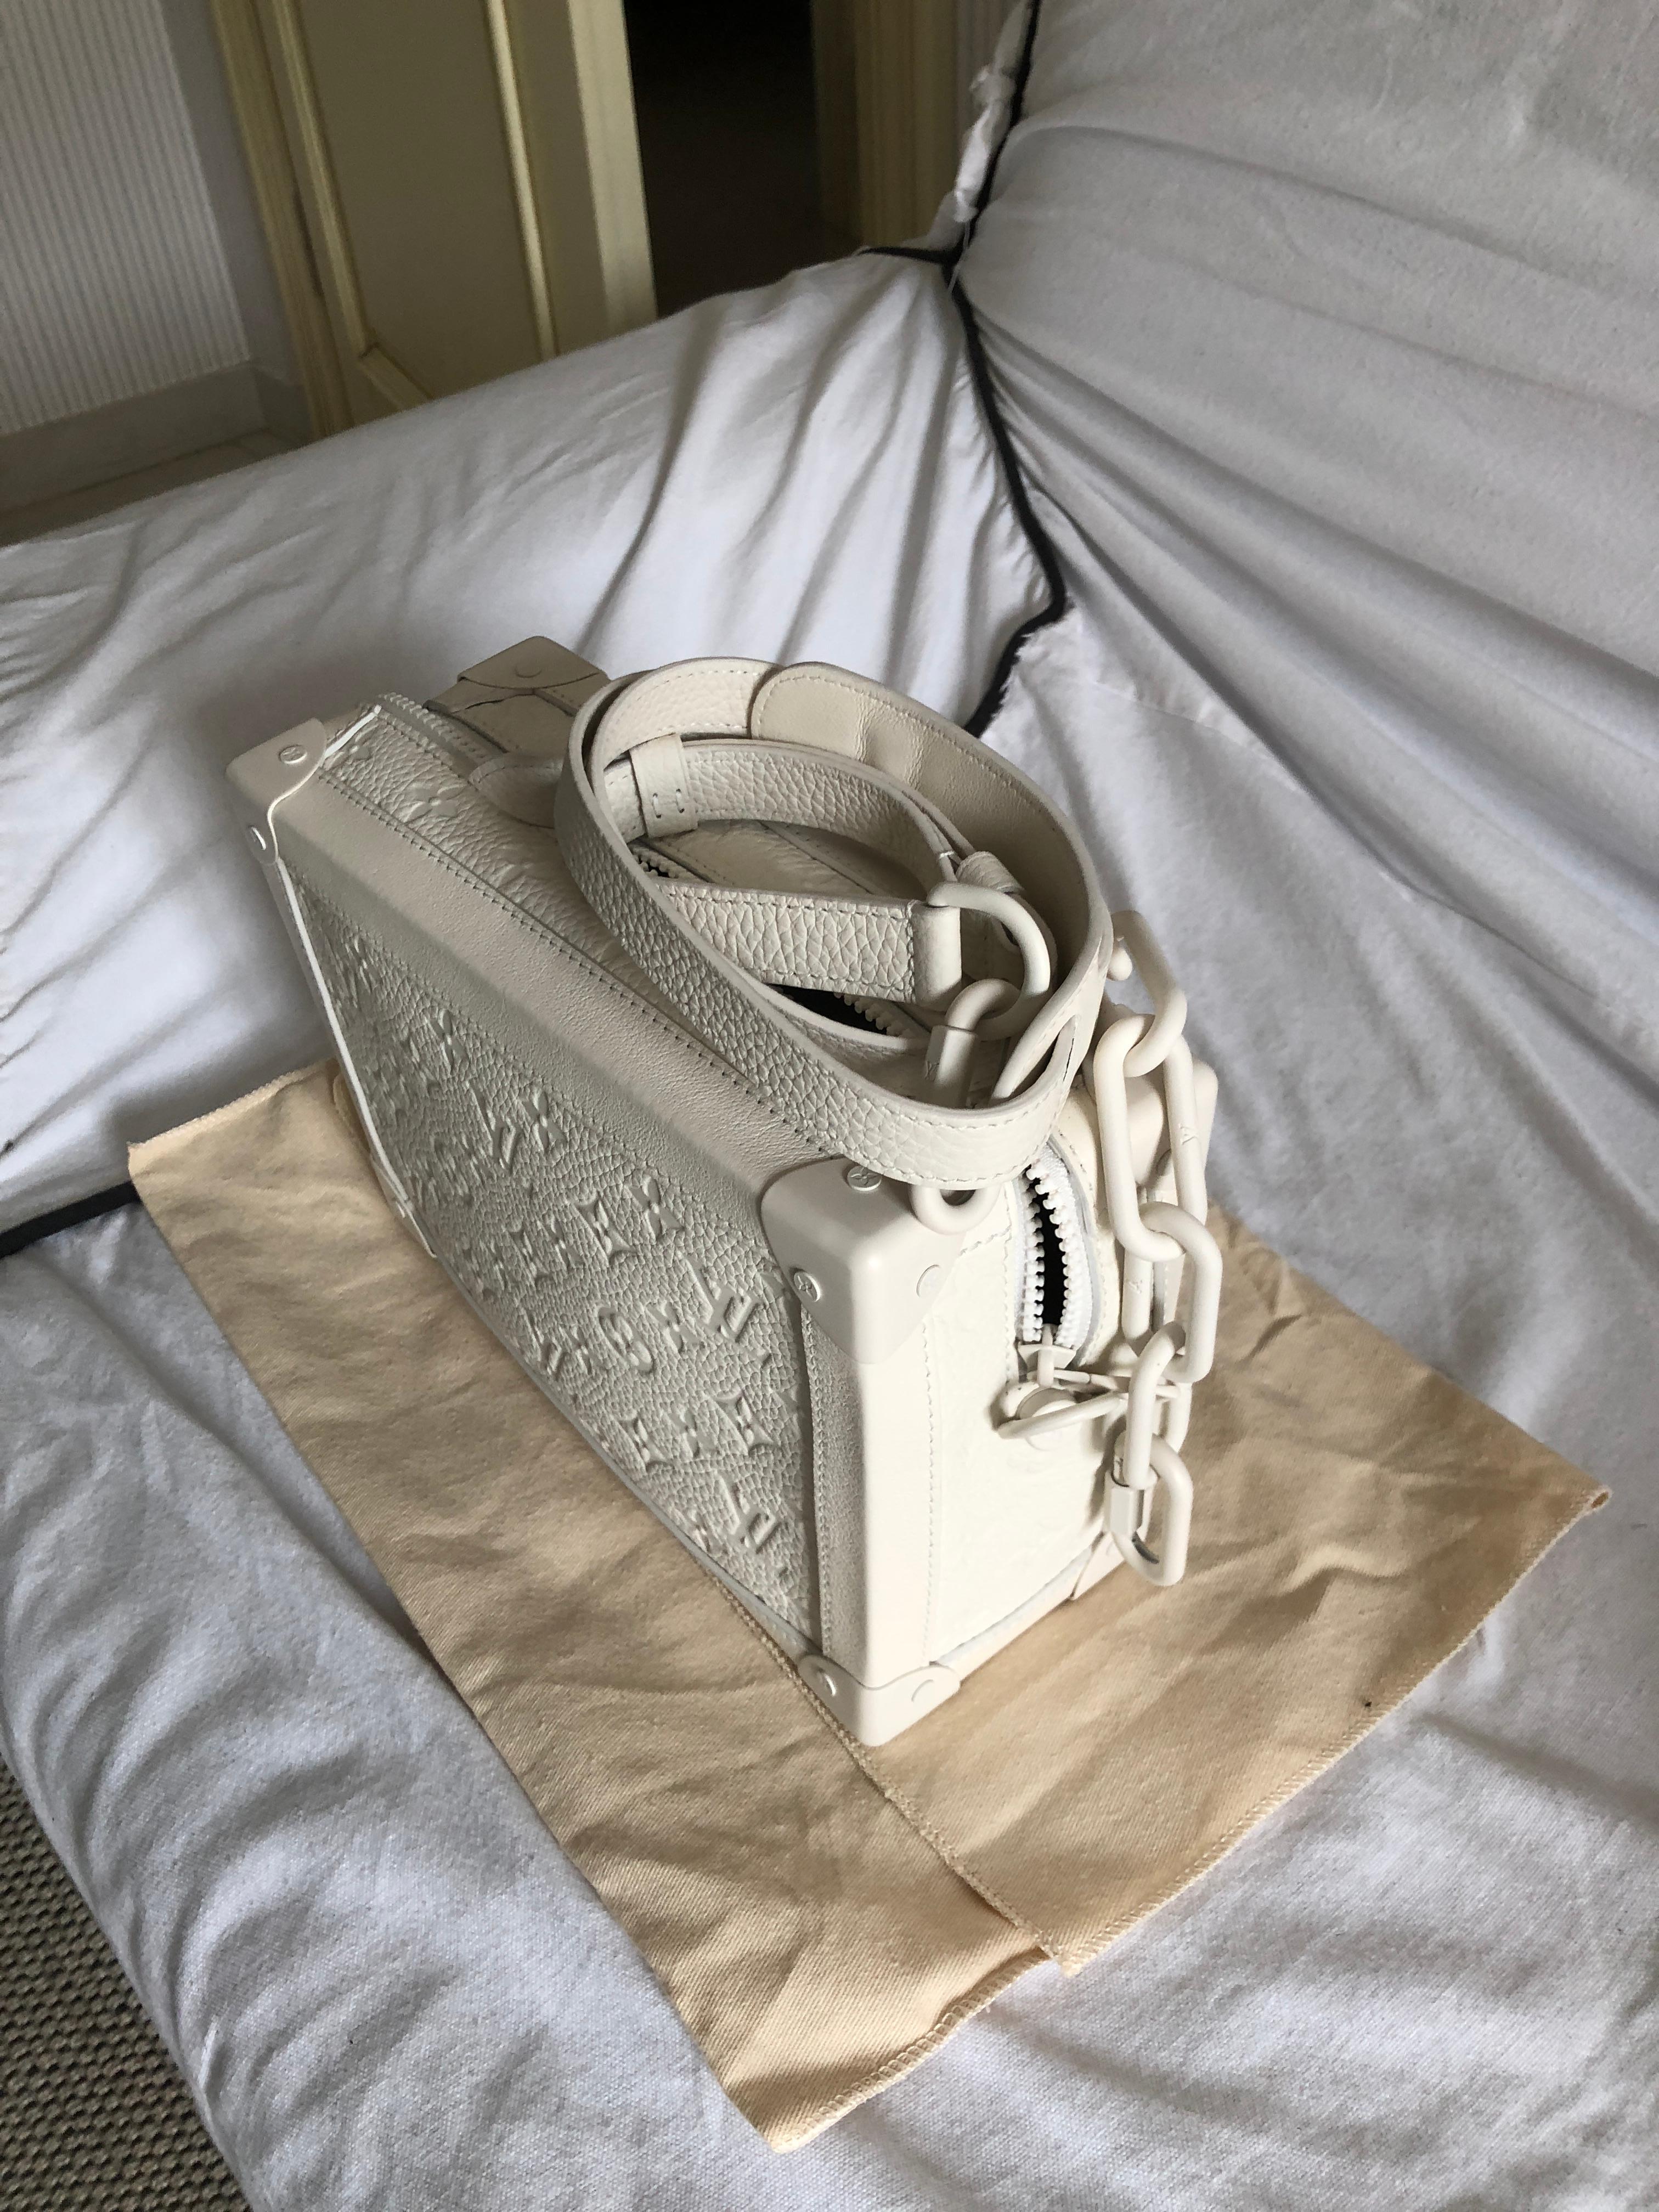 Bag Louis Vuitton Model Soft Trunk
L 9.8 x H 6.9 x W 3.7 inches
Powder White
Taurillon Monogram leather 
Calf leather trim
White hardware
Matt-effect resin chain
Removable, adjustable leather strap
Zip closure
Textile lining 
Two inside flat pockets